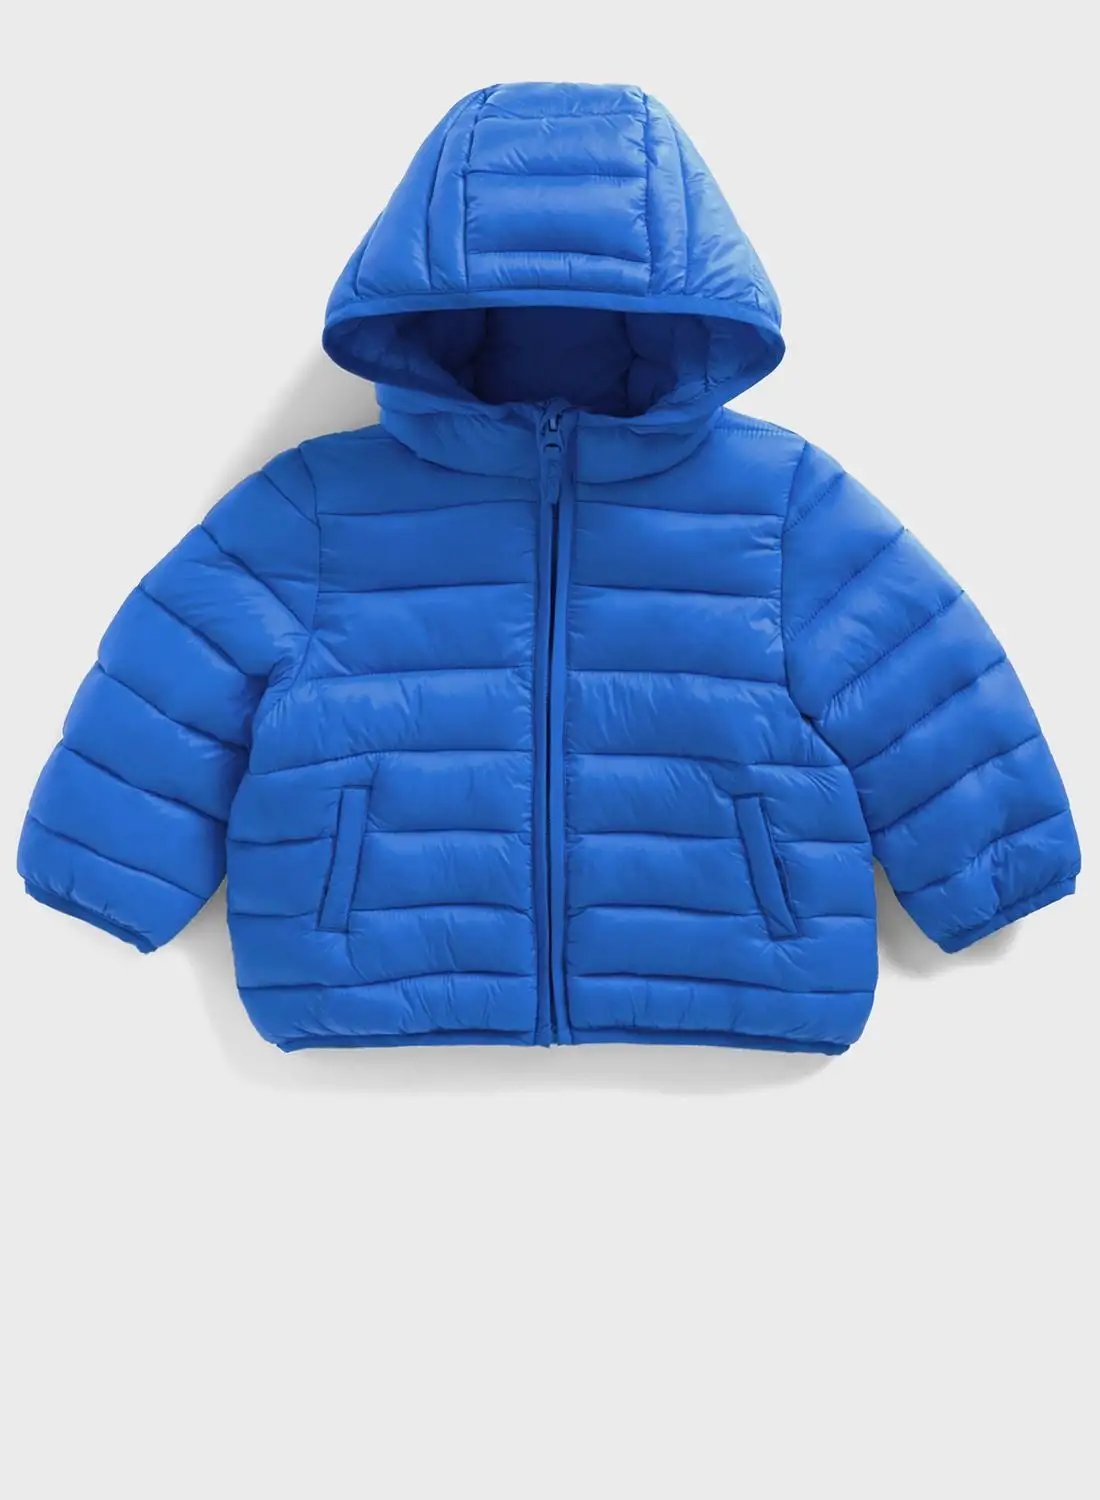 mothercare Youth Packaway Jacket